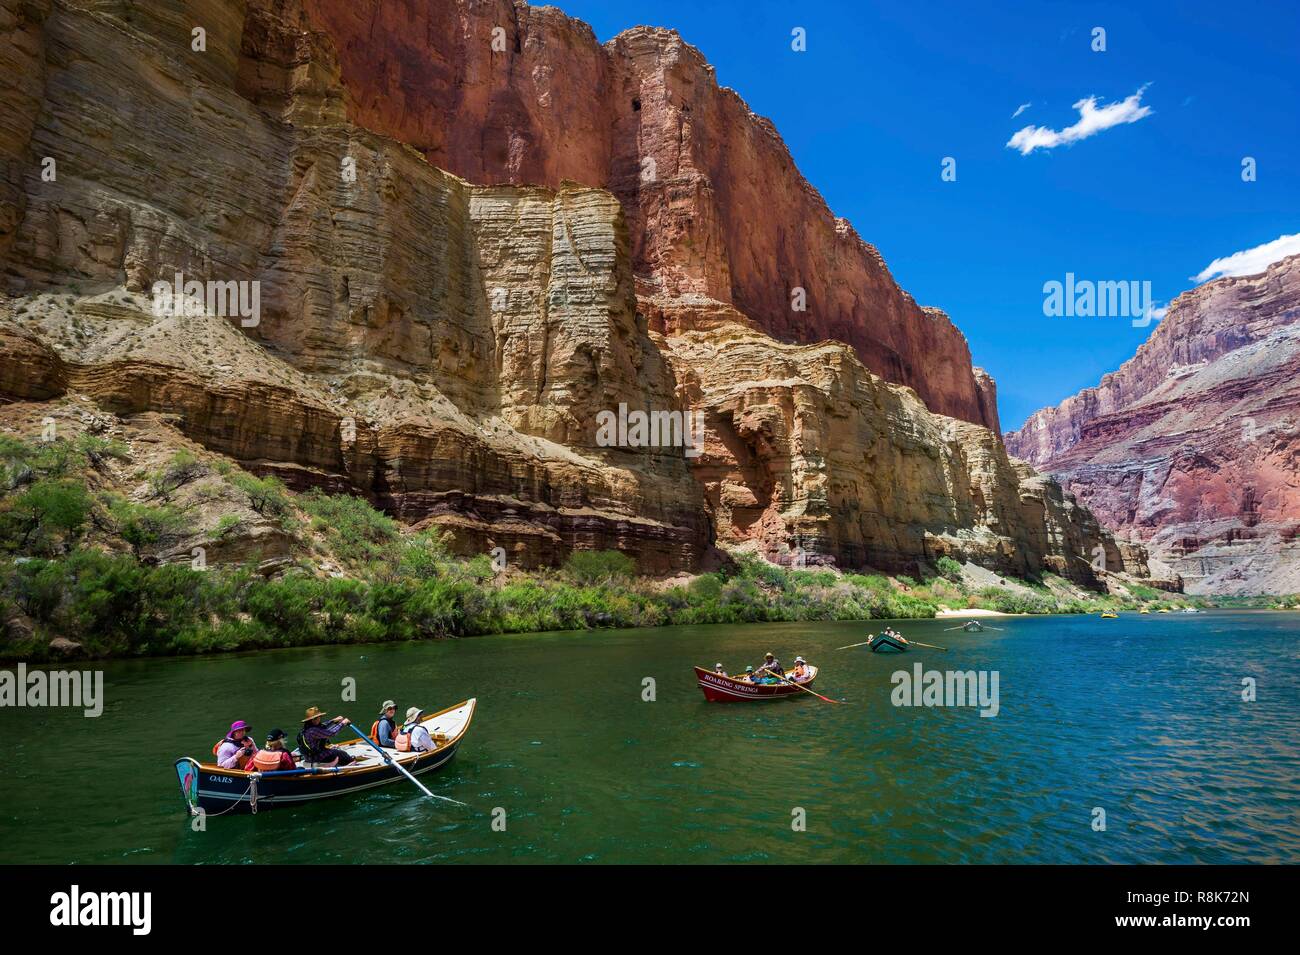 United States, Arizona, Grand Canyon National Park, rafting down the Colorado river between Lee's Ferry near Page and Phantom Ranch Stock Photo